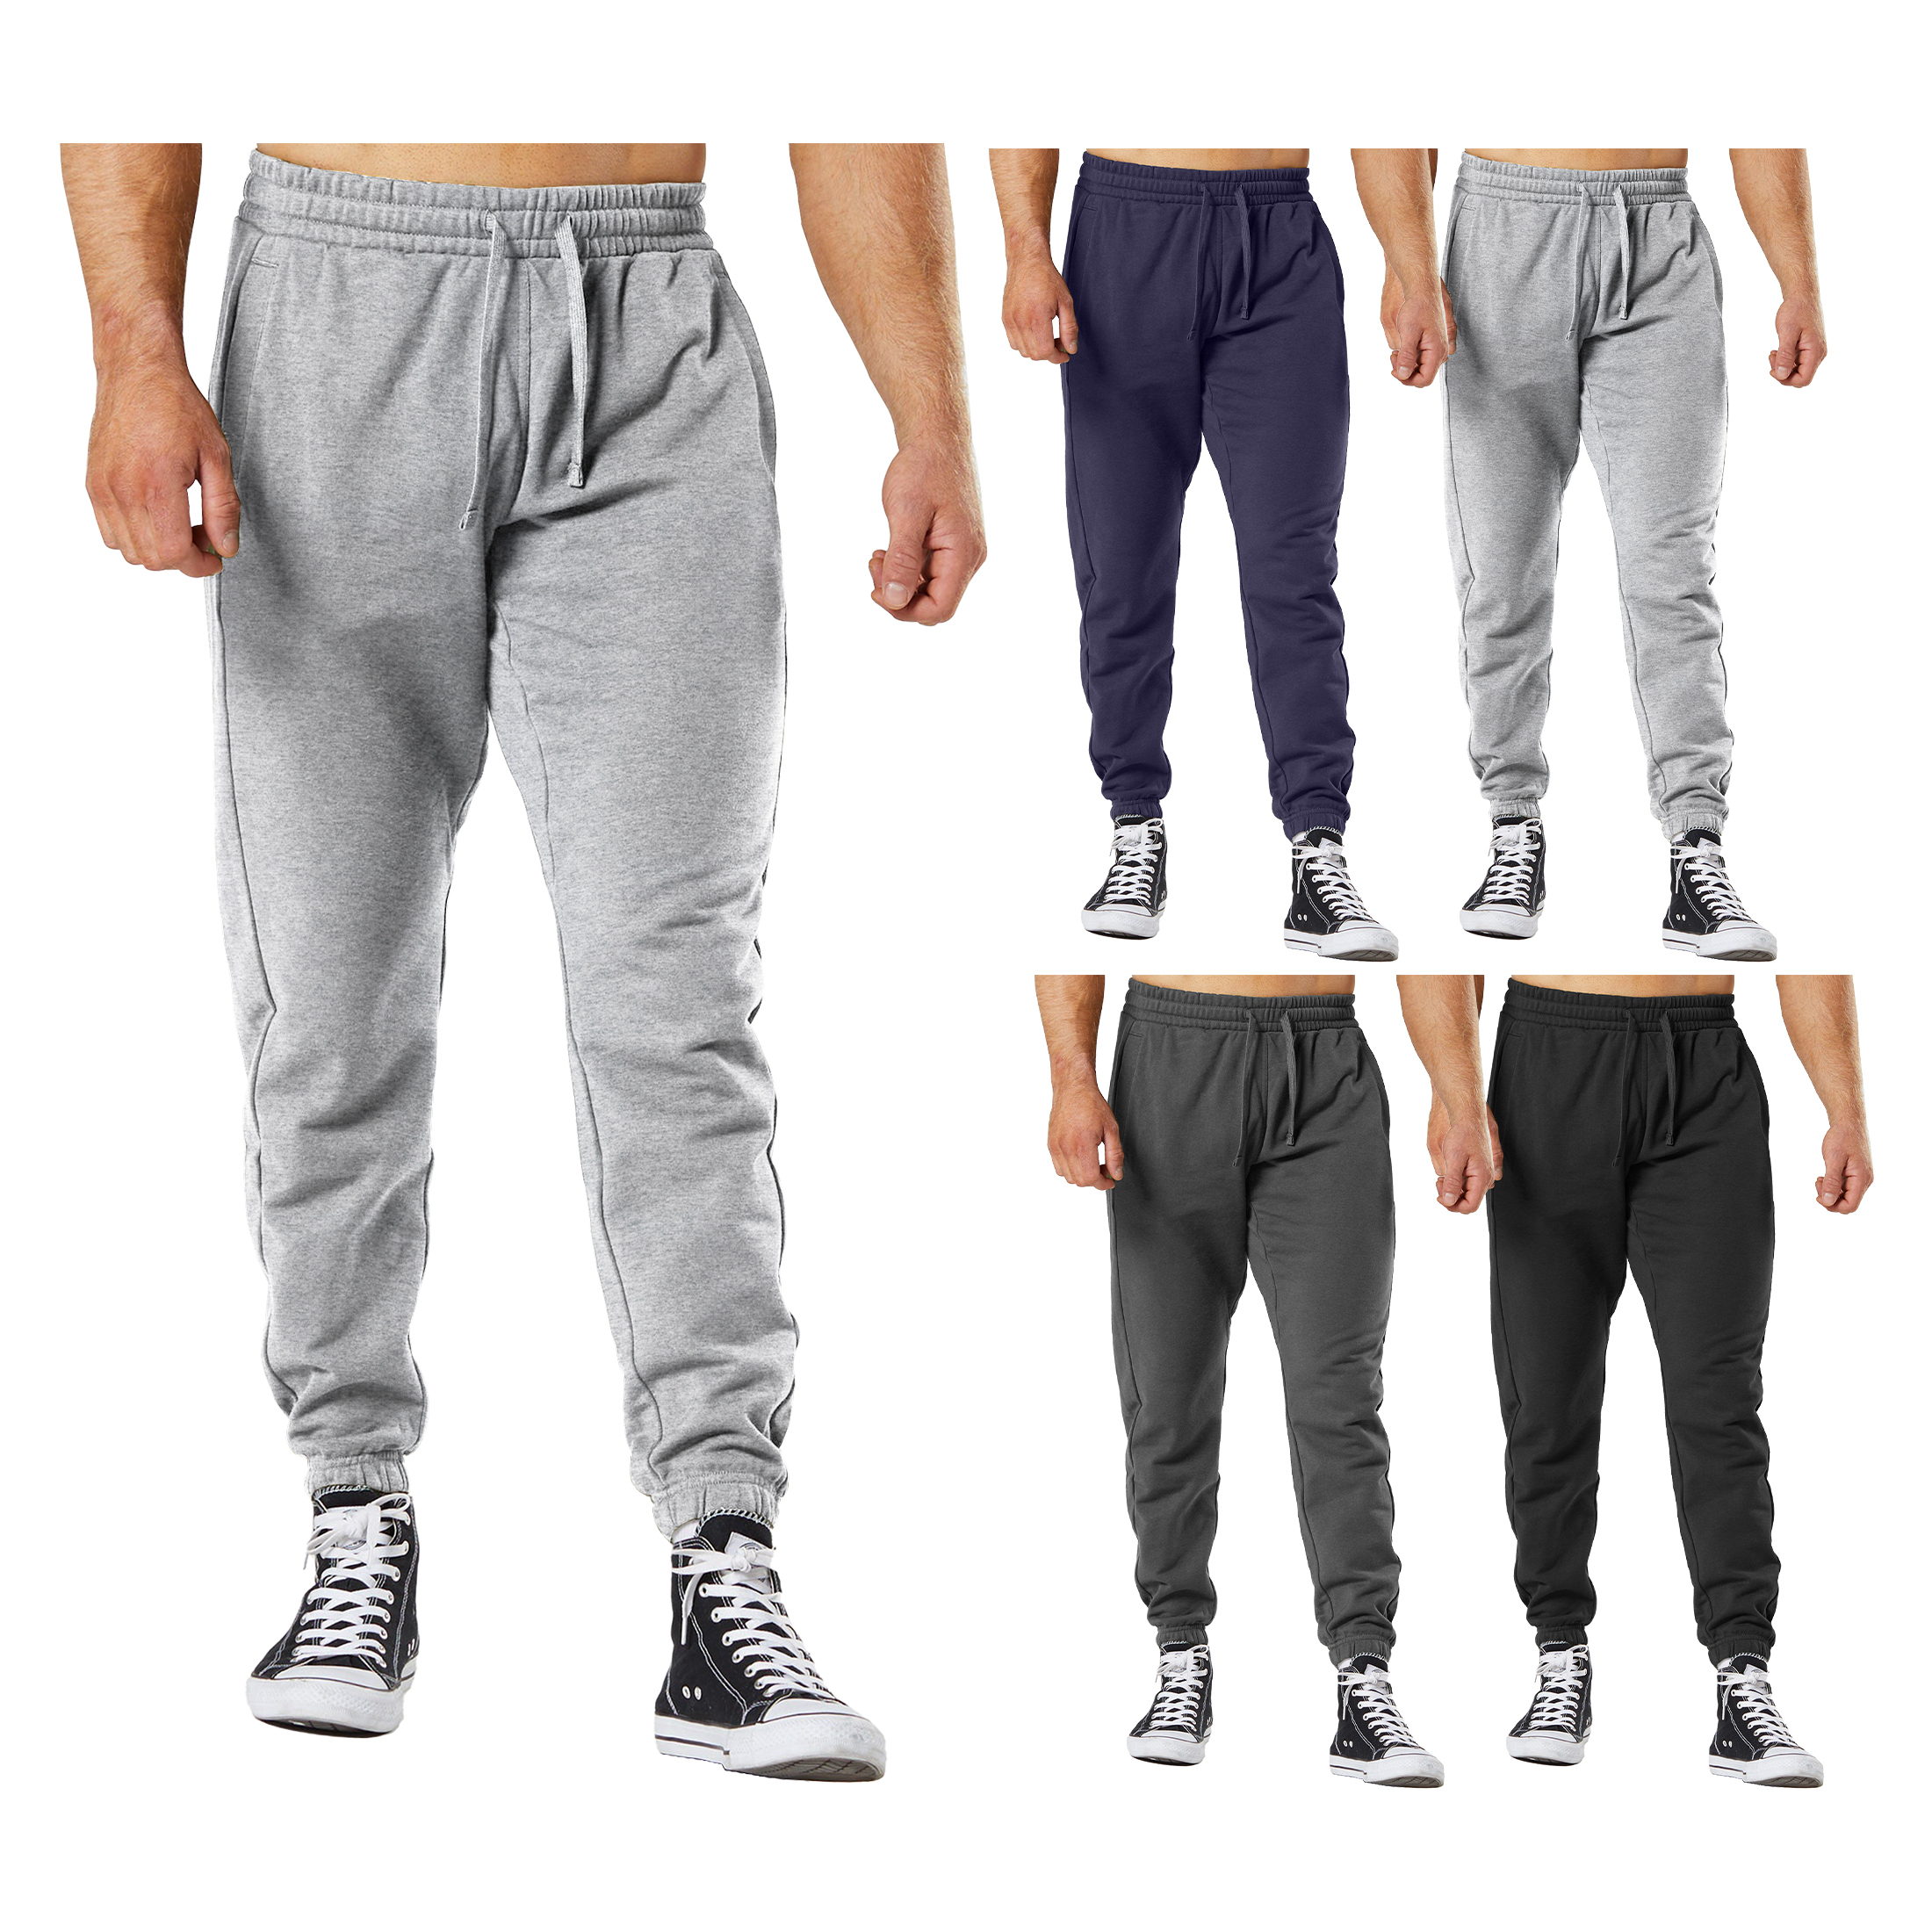 3-Pack: Men's Casual Fleece-Lined Elastic Bottom Jogger Pants With Pockets - Large